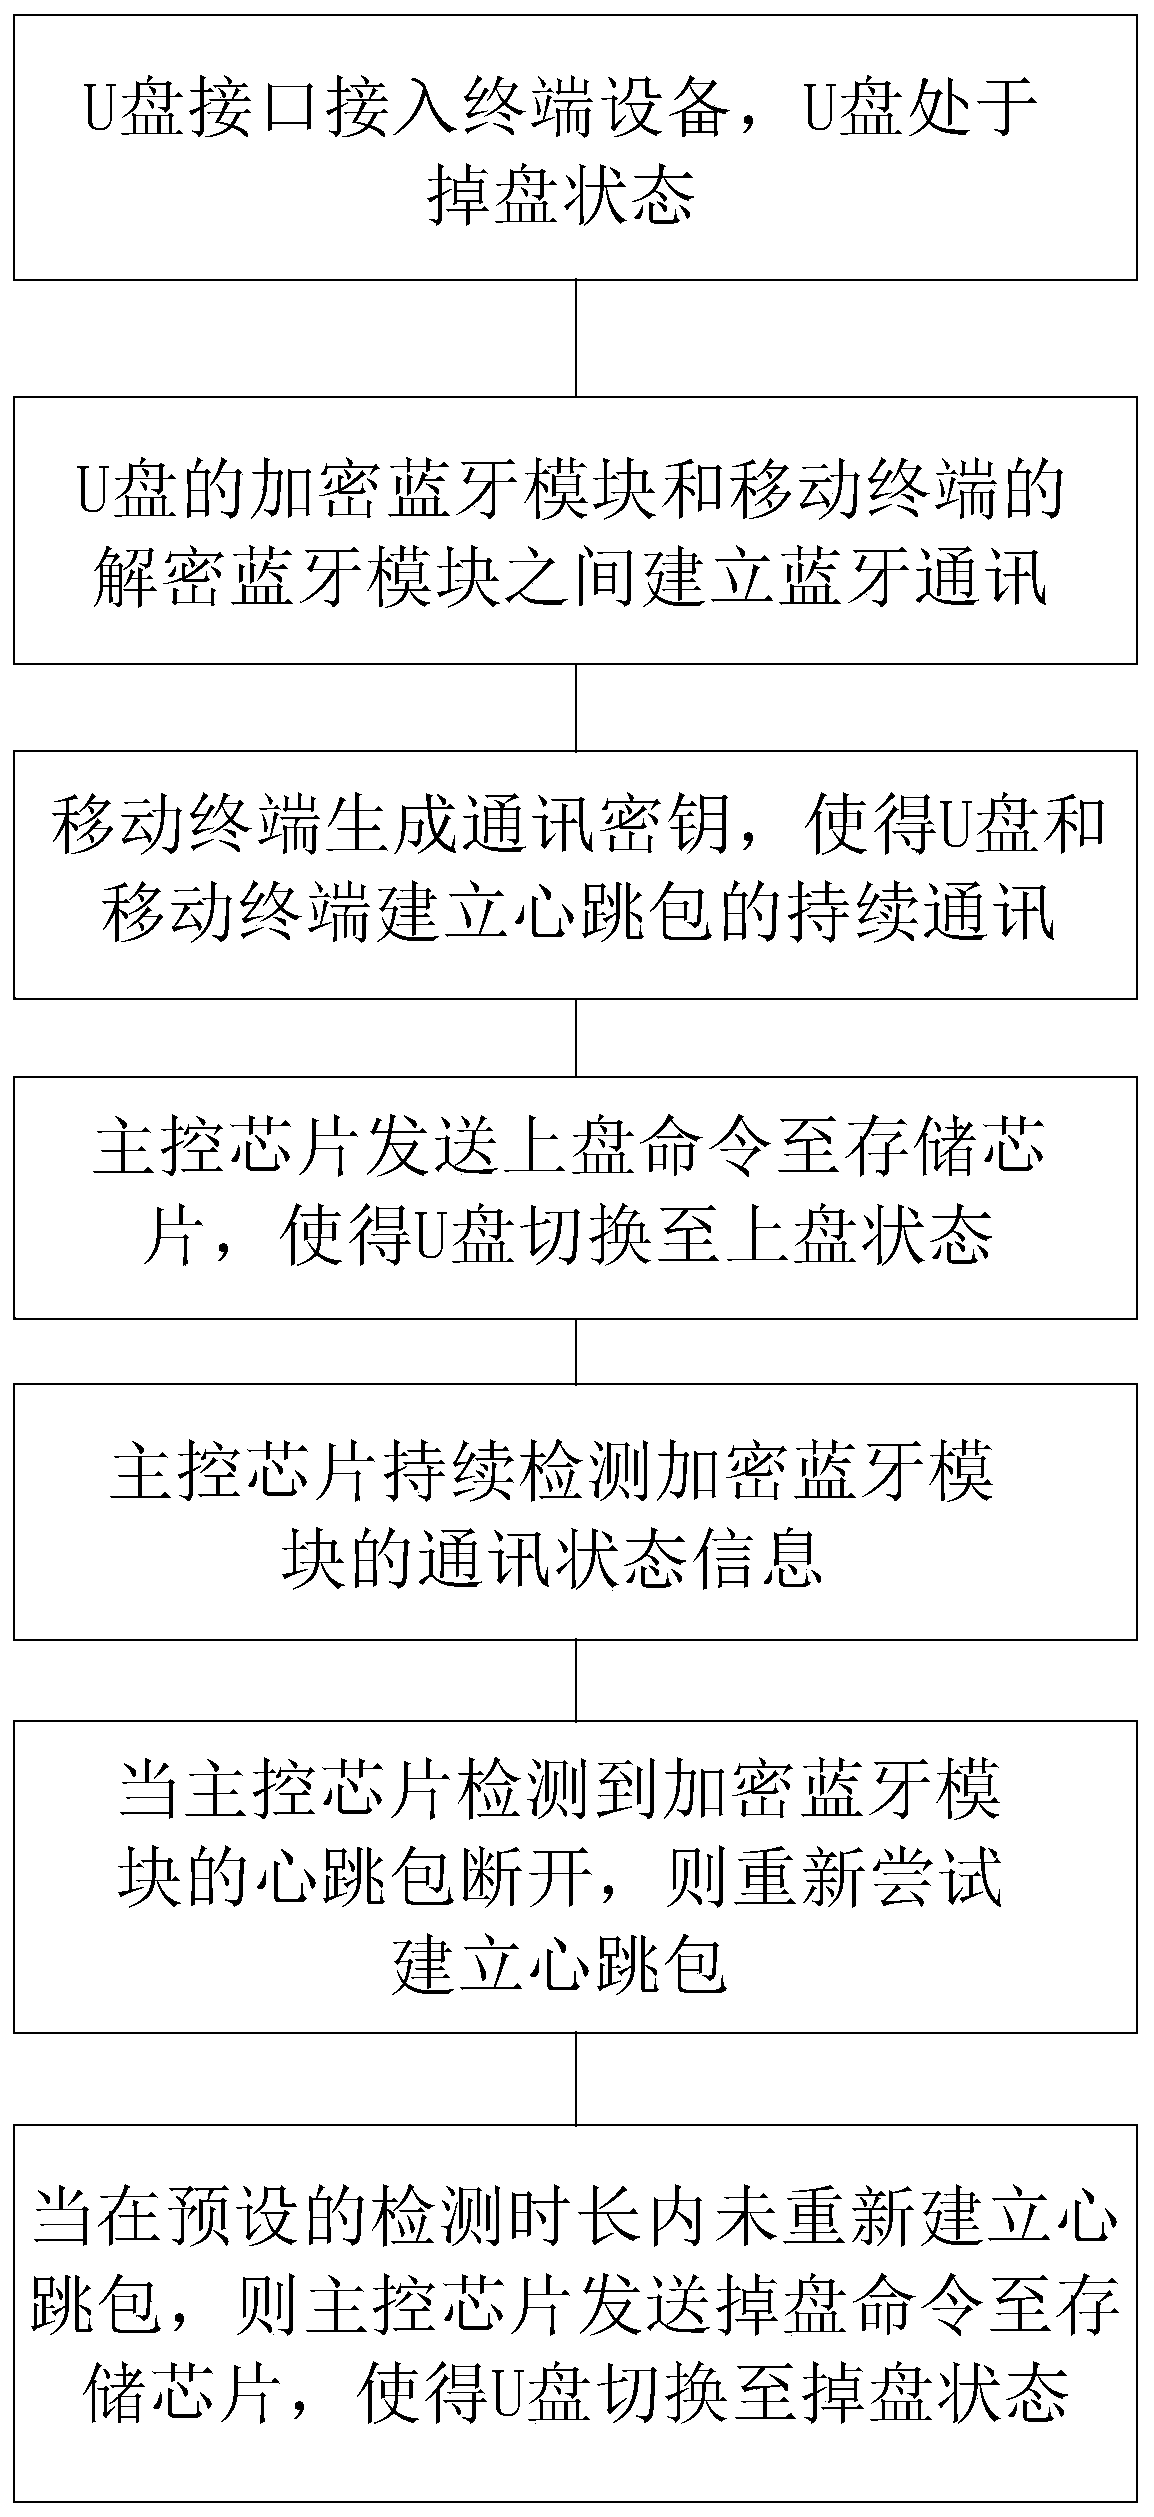 USB flash disk data protection system and method based on real-time multi-party interactive authentication